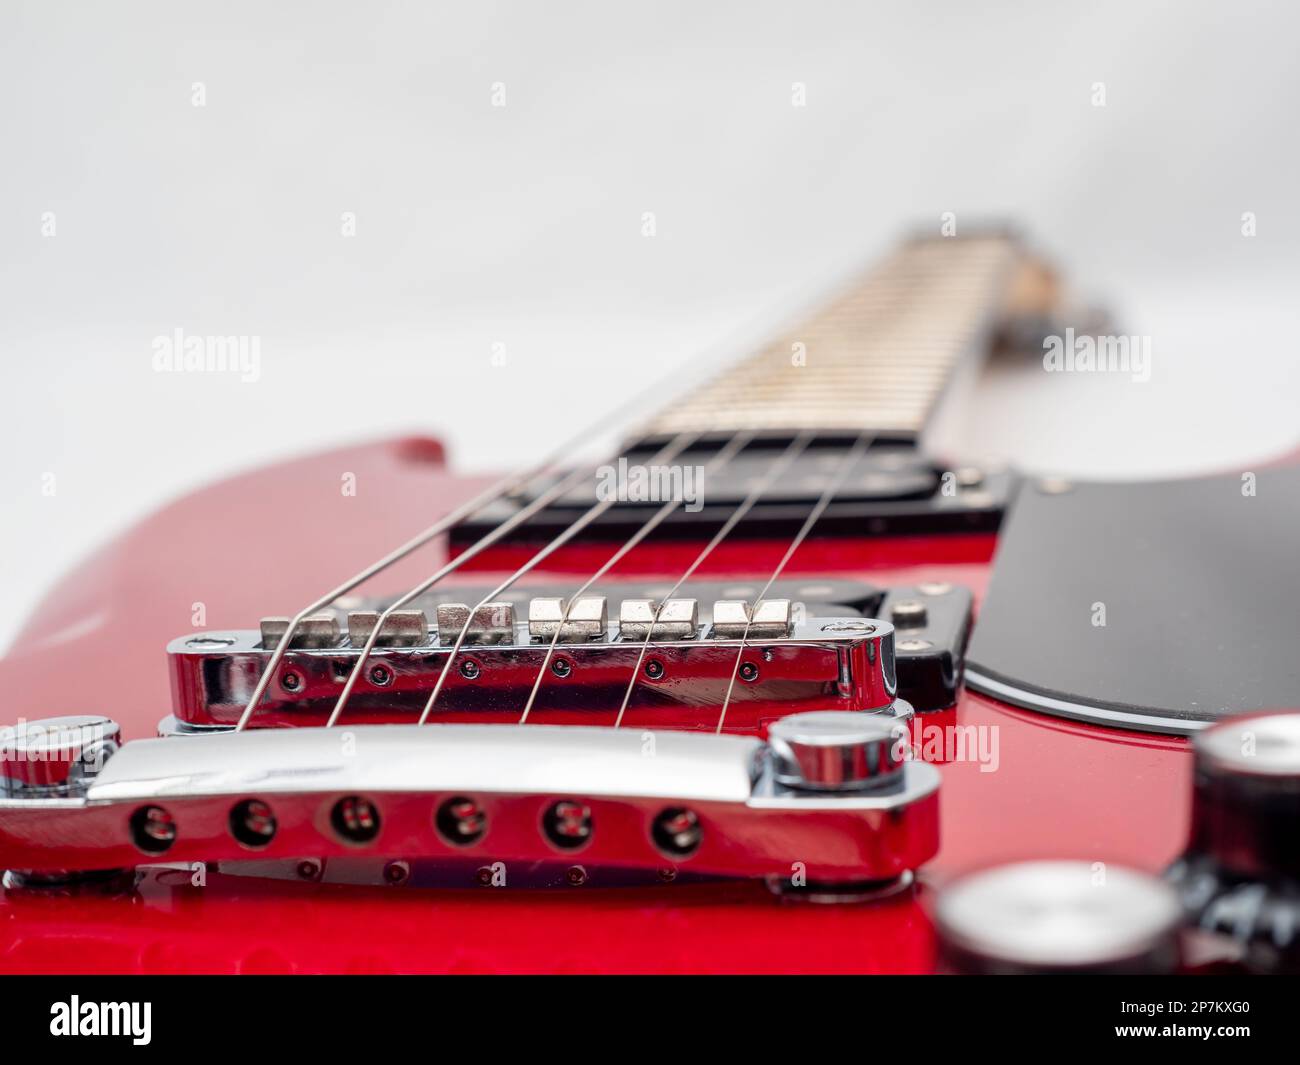 Red electric guitar isolated on white background. Musical instrument guitar. Close-up. Stock Photo